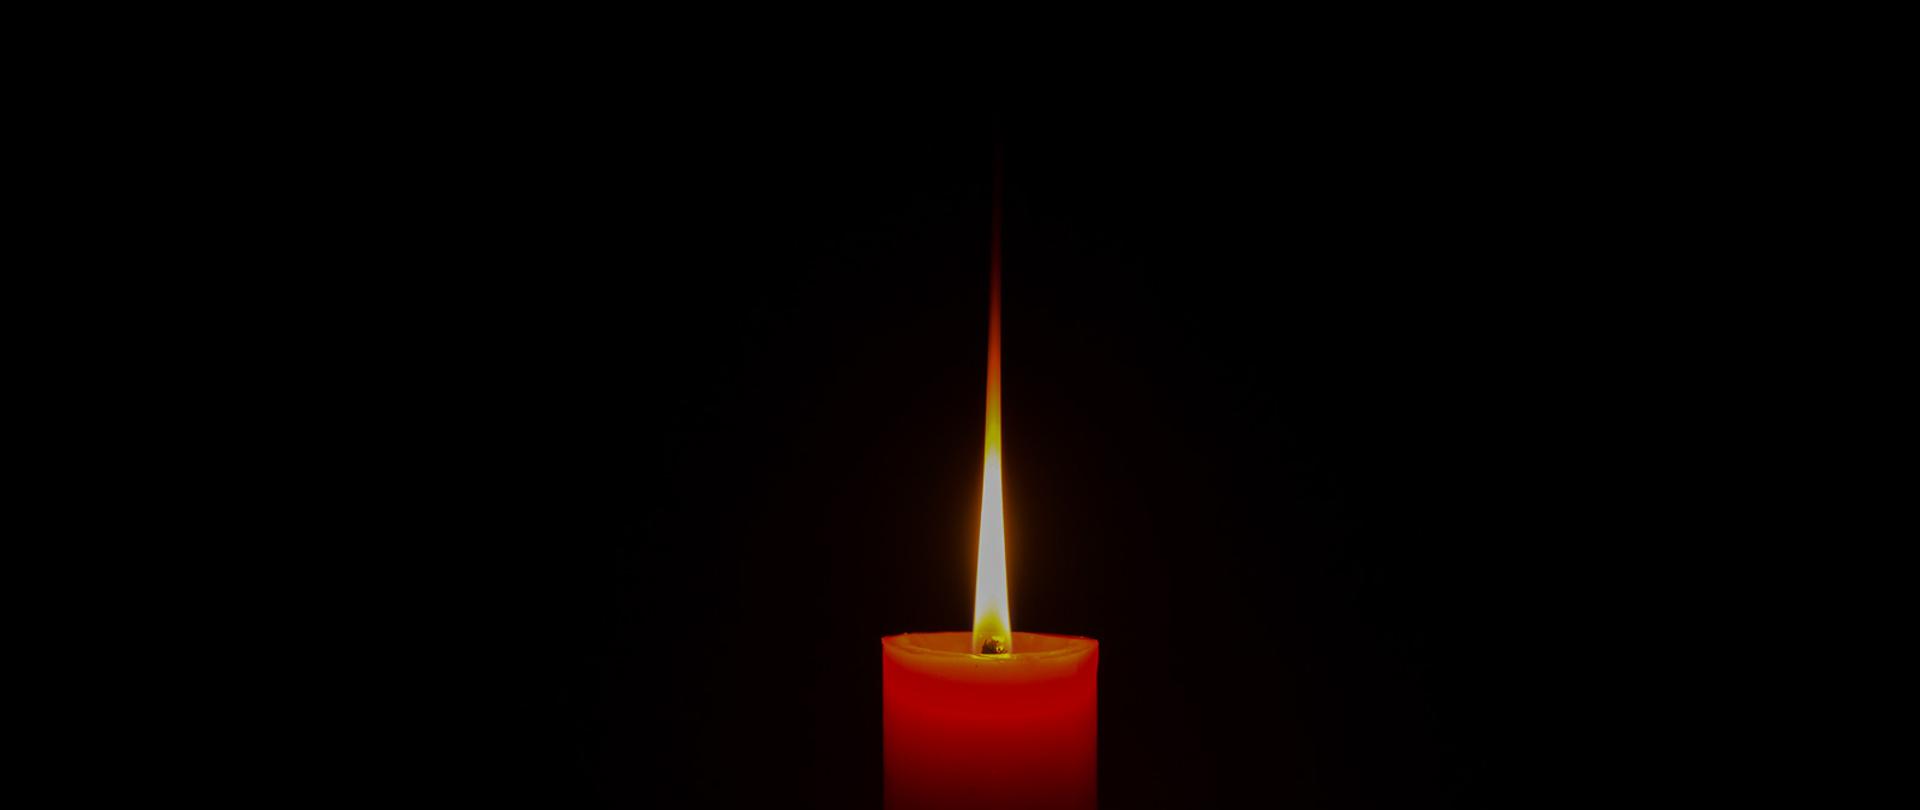 One candle light reflecting the shadow Black background